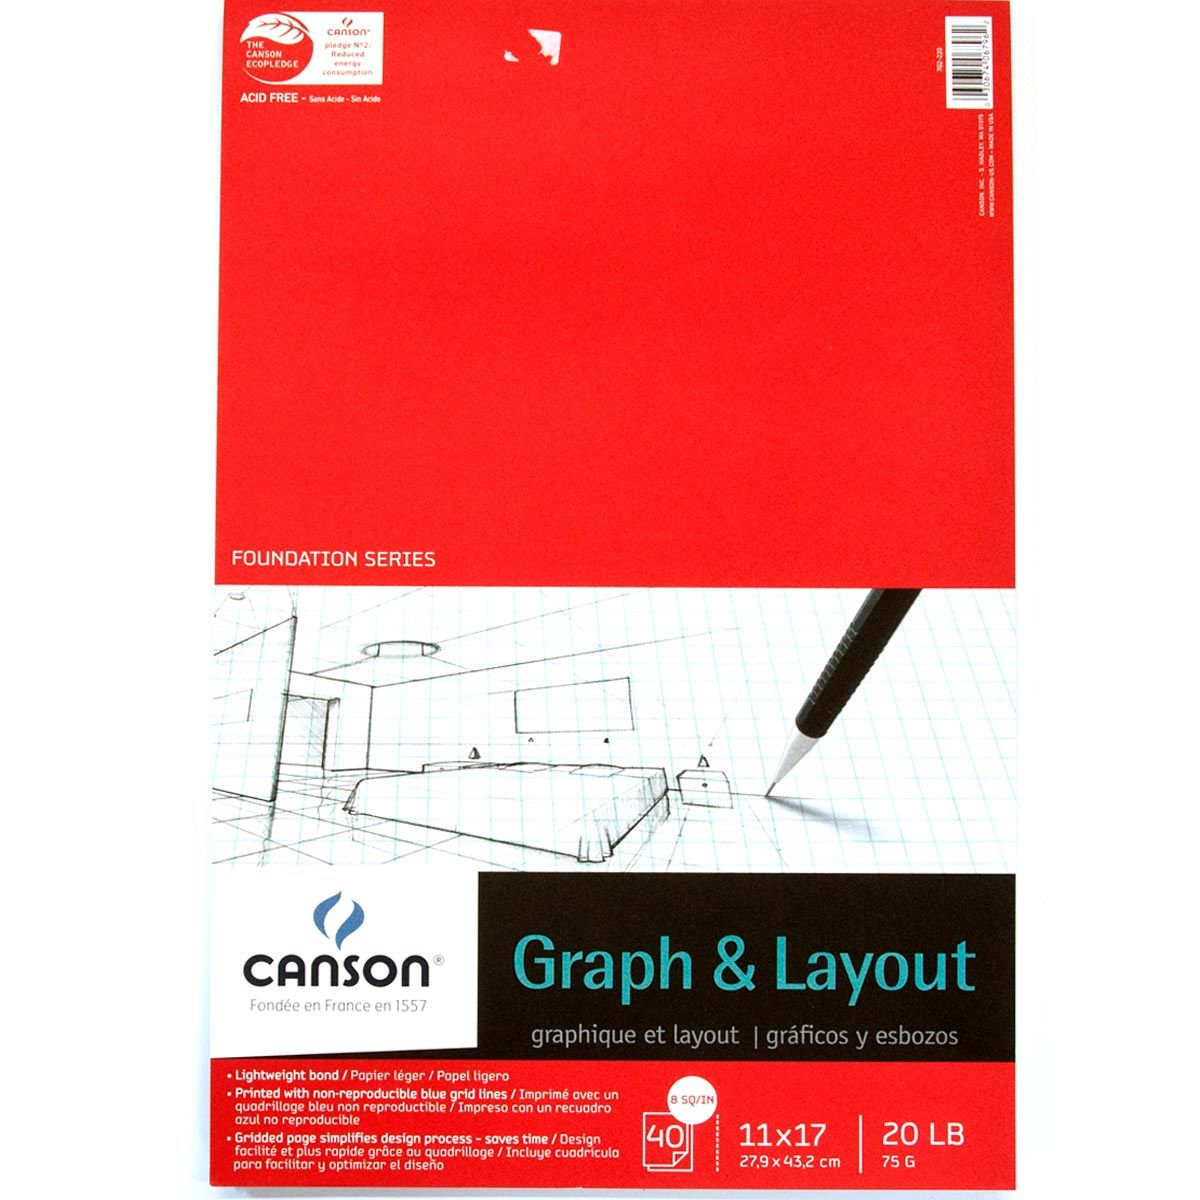 Canson Graph & Layout 40 sheets, 20 lb Pad 11 x 17 Inch